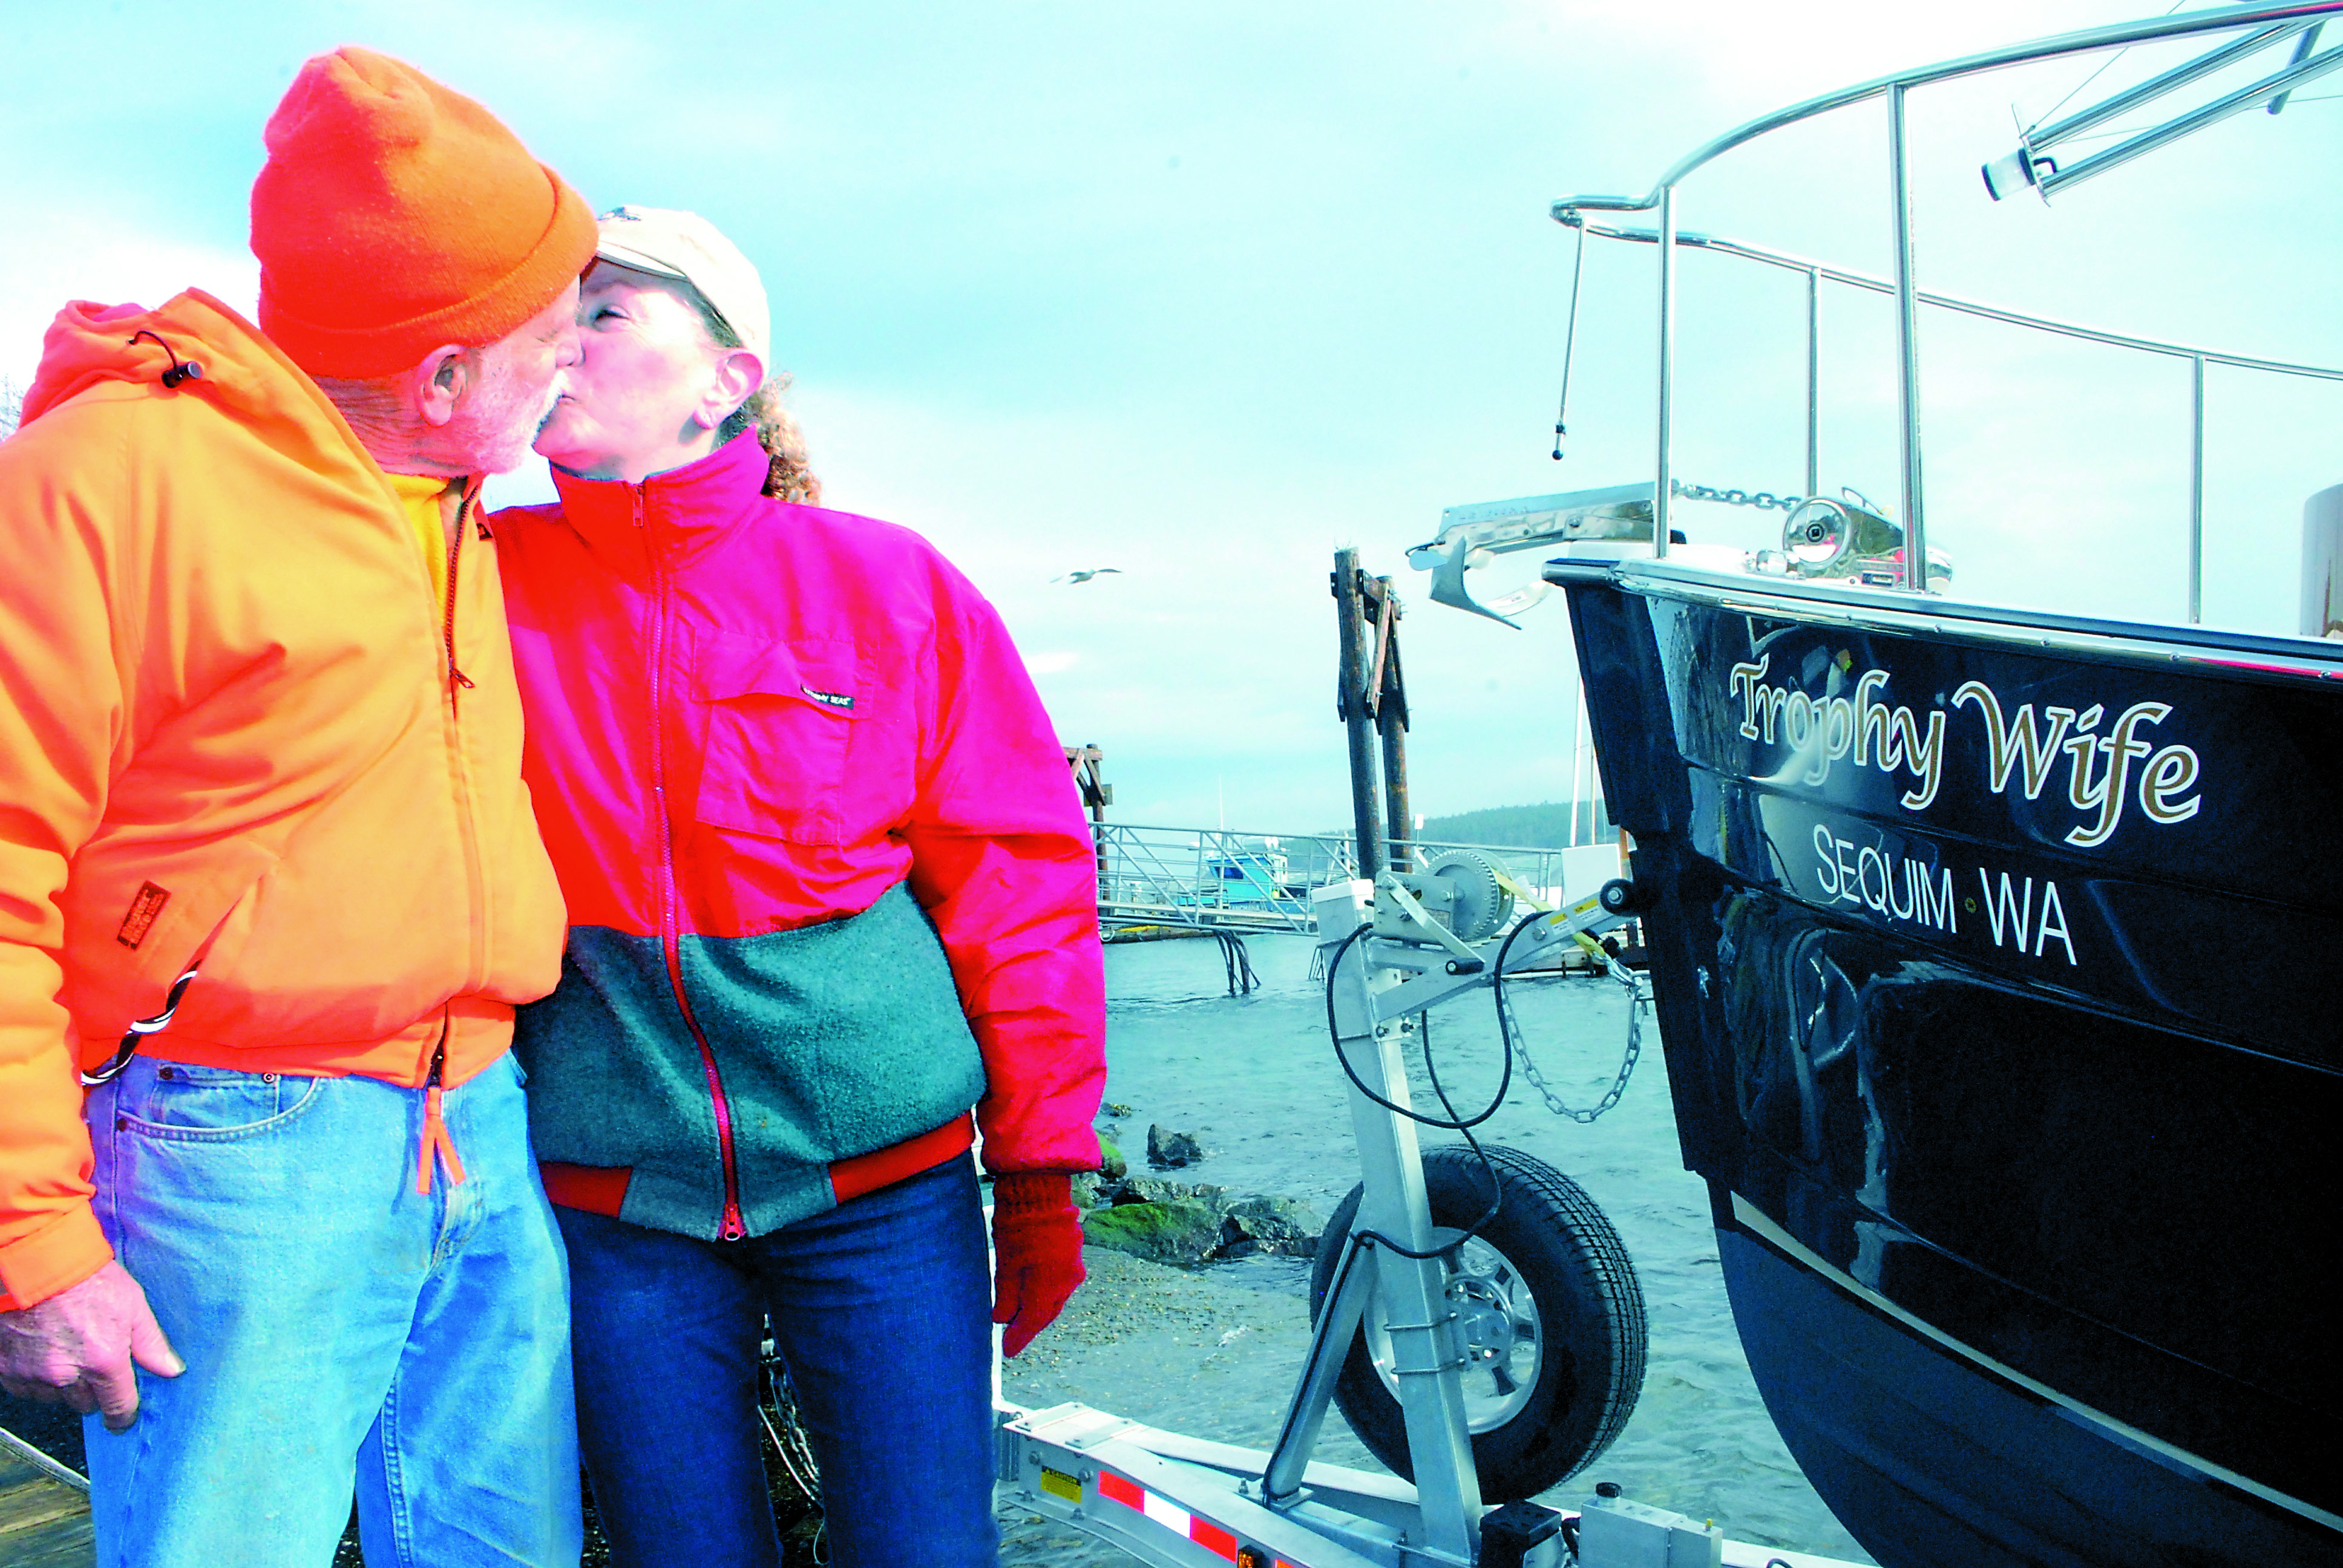 The Janises smooch in front of their new yacht at the John Wayne Marina in Sequim. Jeff Chew/Peninsula Daily News